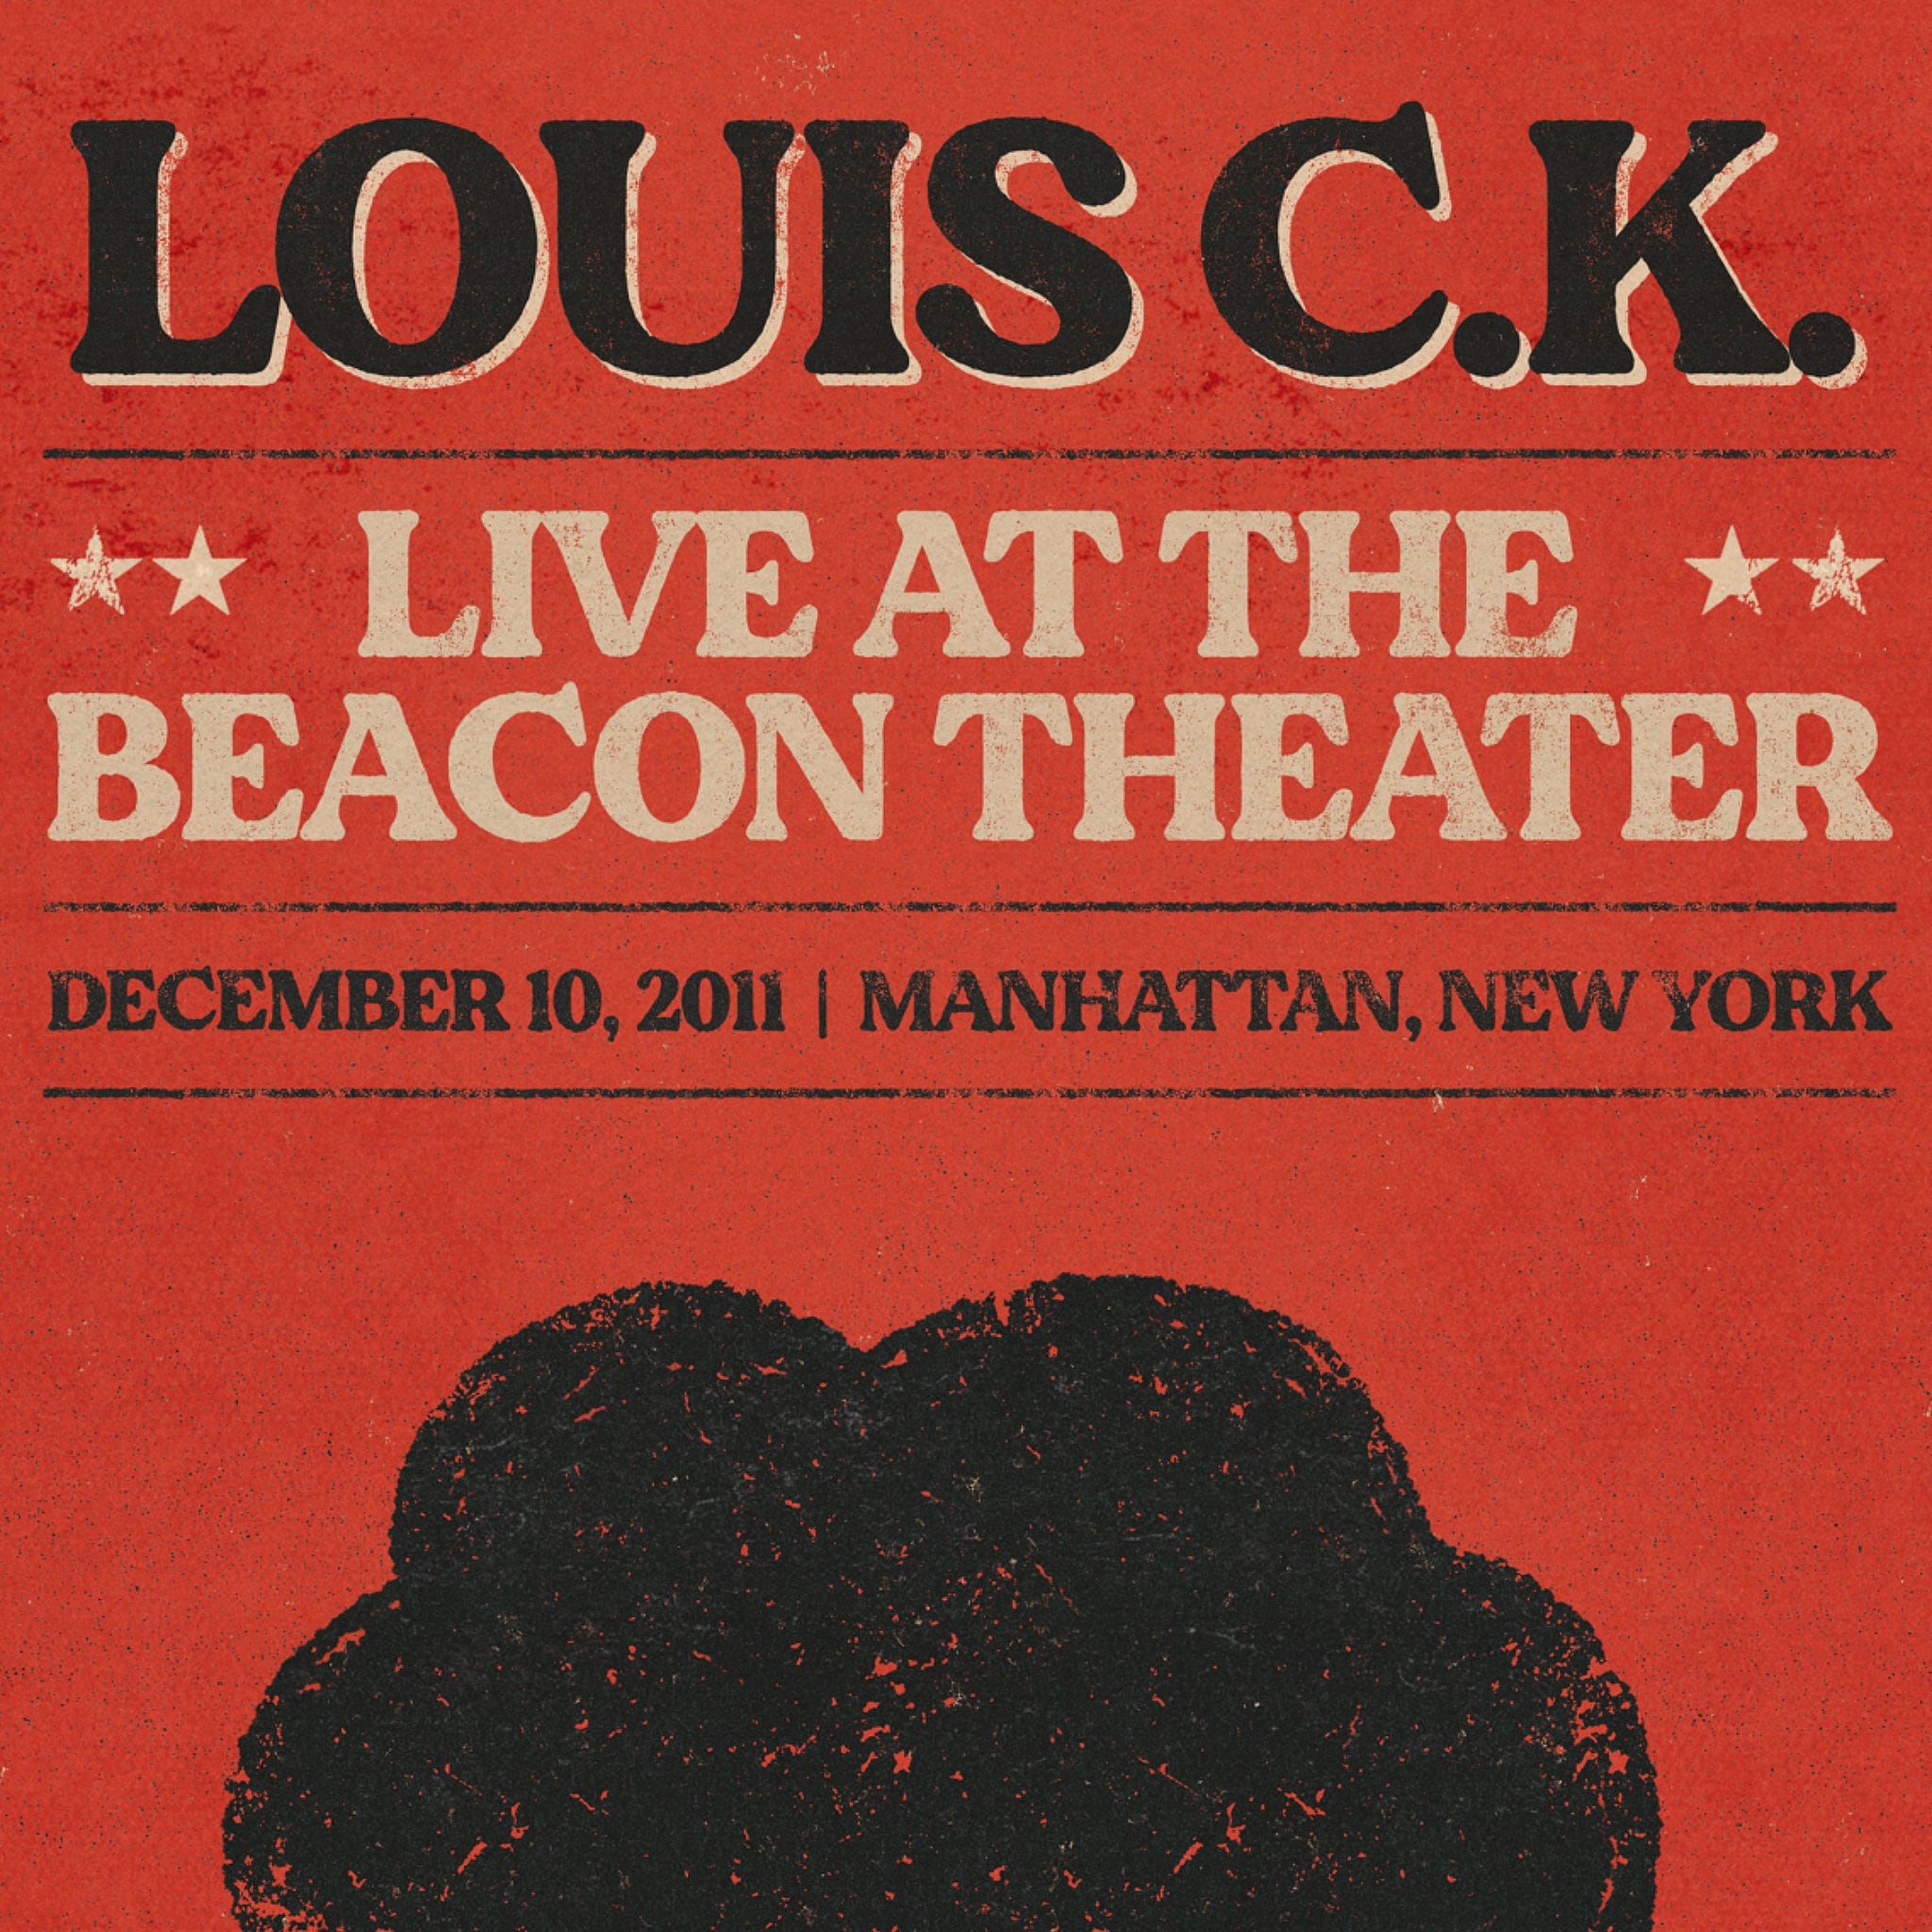 LOUIS CK POSTER live at the Beacon Theater Vintage Art 